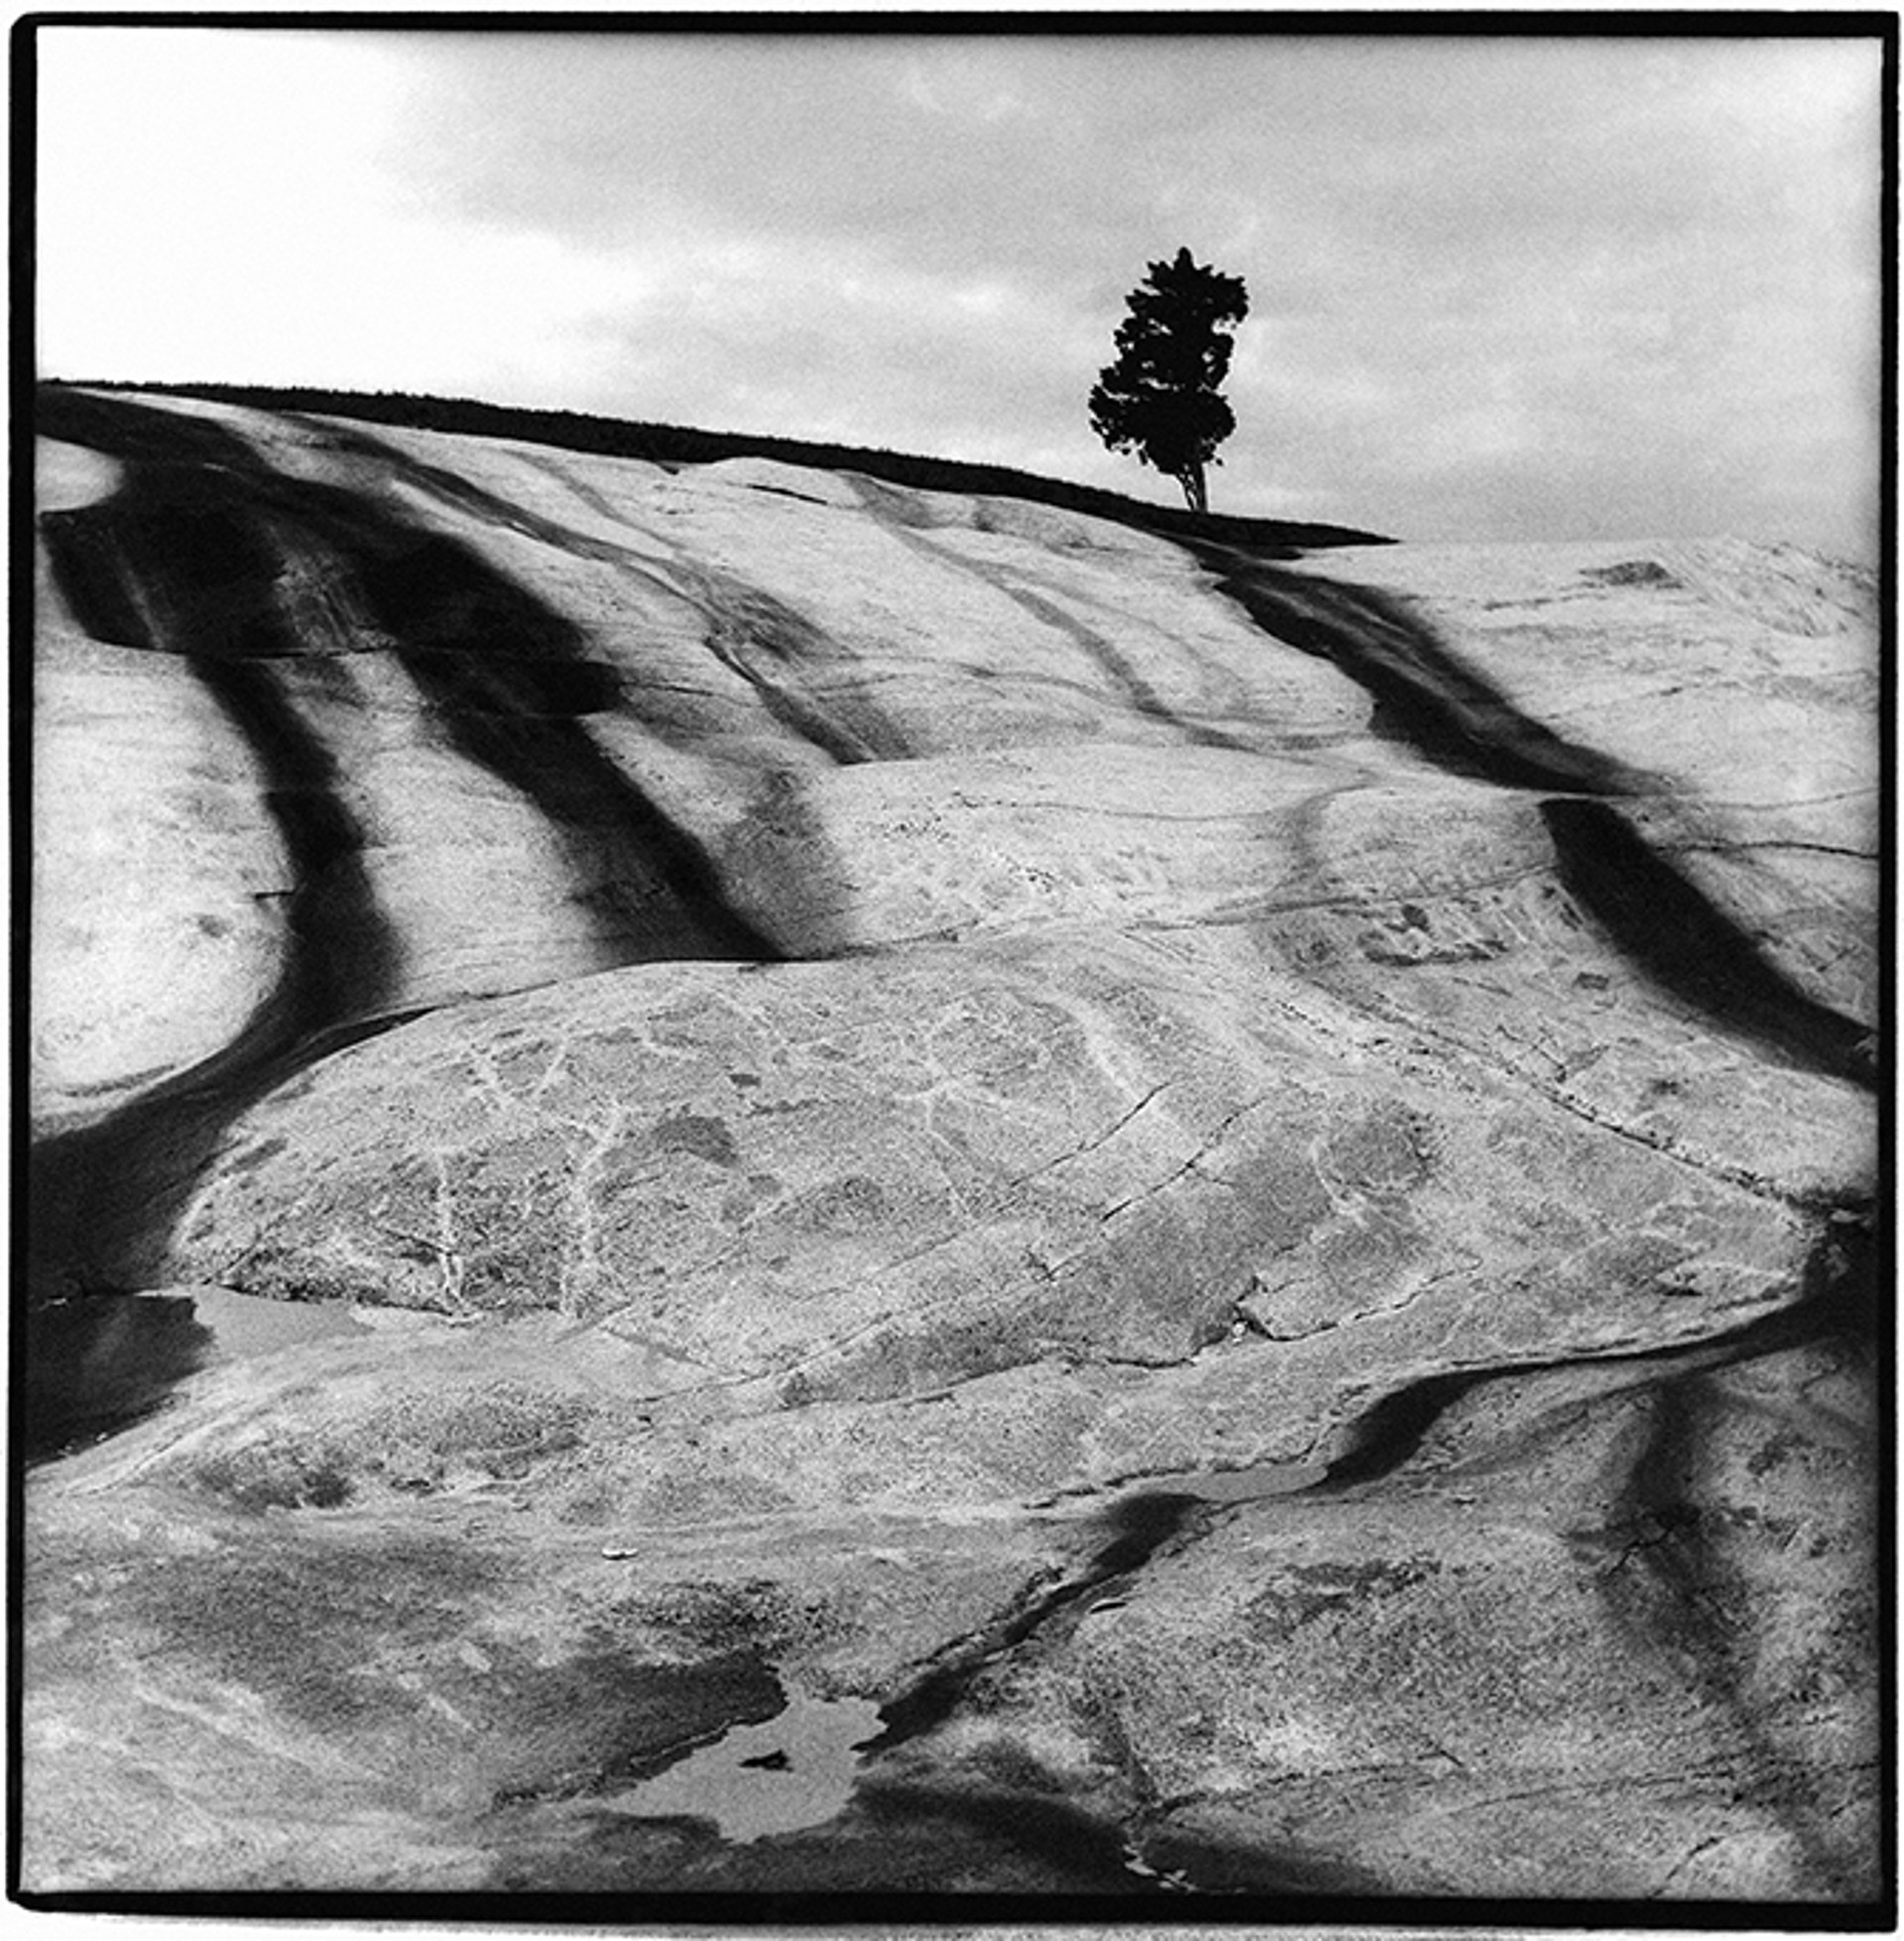 Landscape Stained Rocks #1 BW by Timothy White